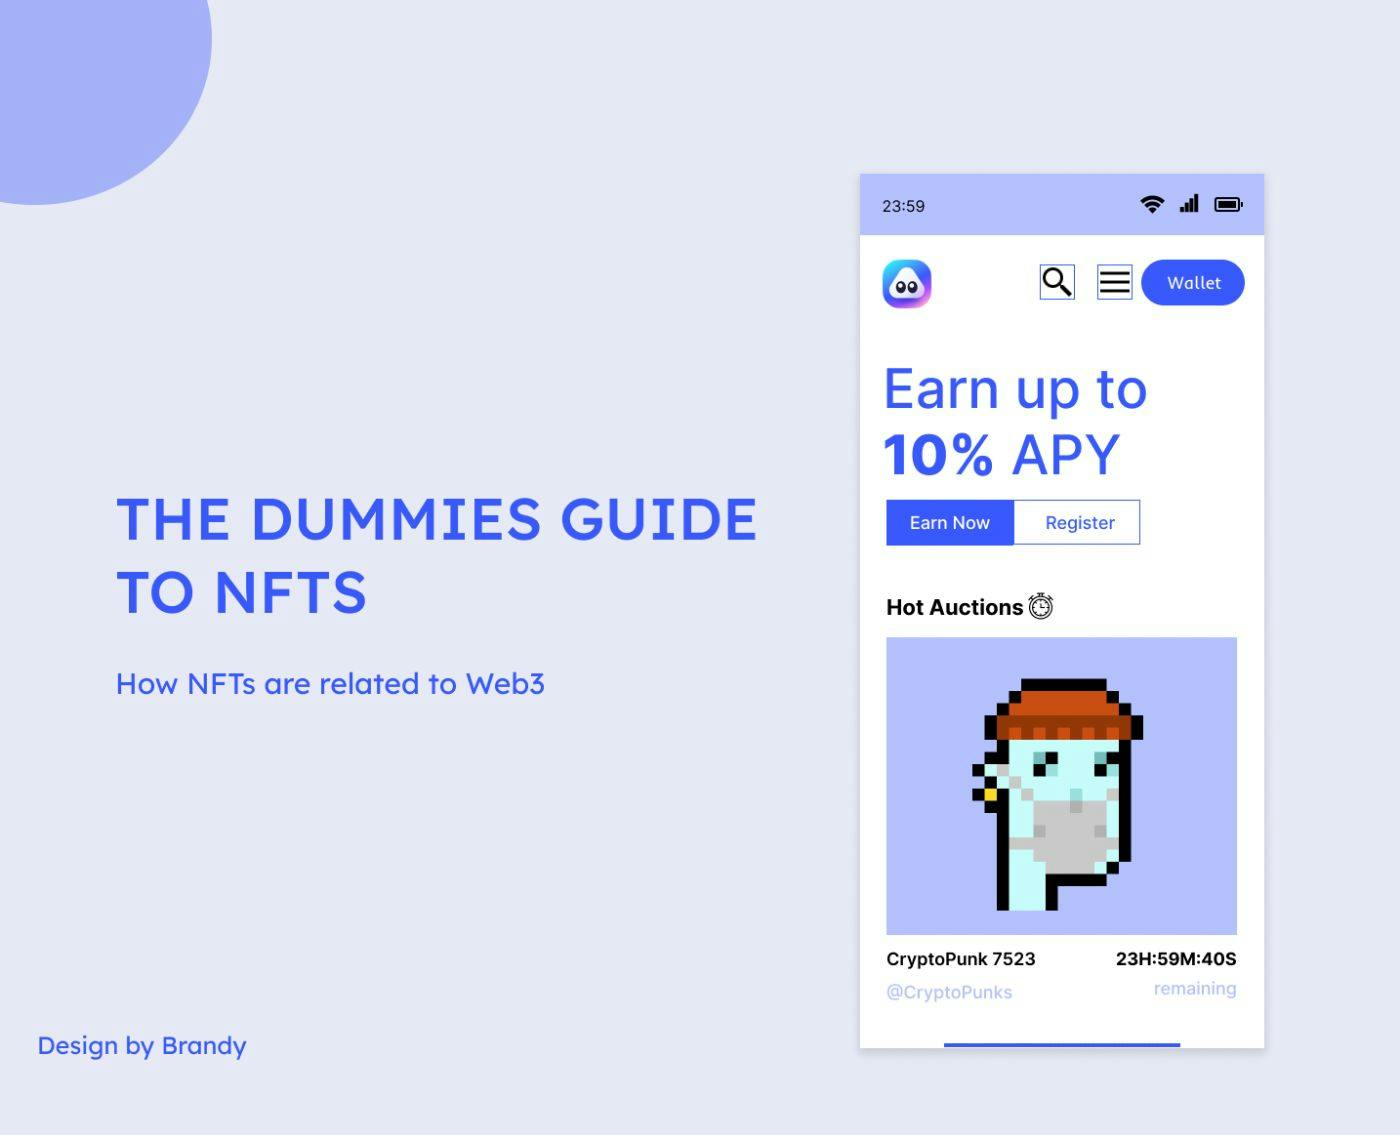 featured image - The Dummies Guide to NFT: How NFTs are related to Web3